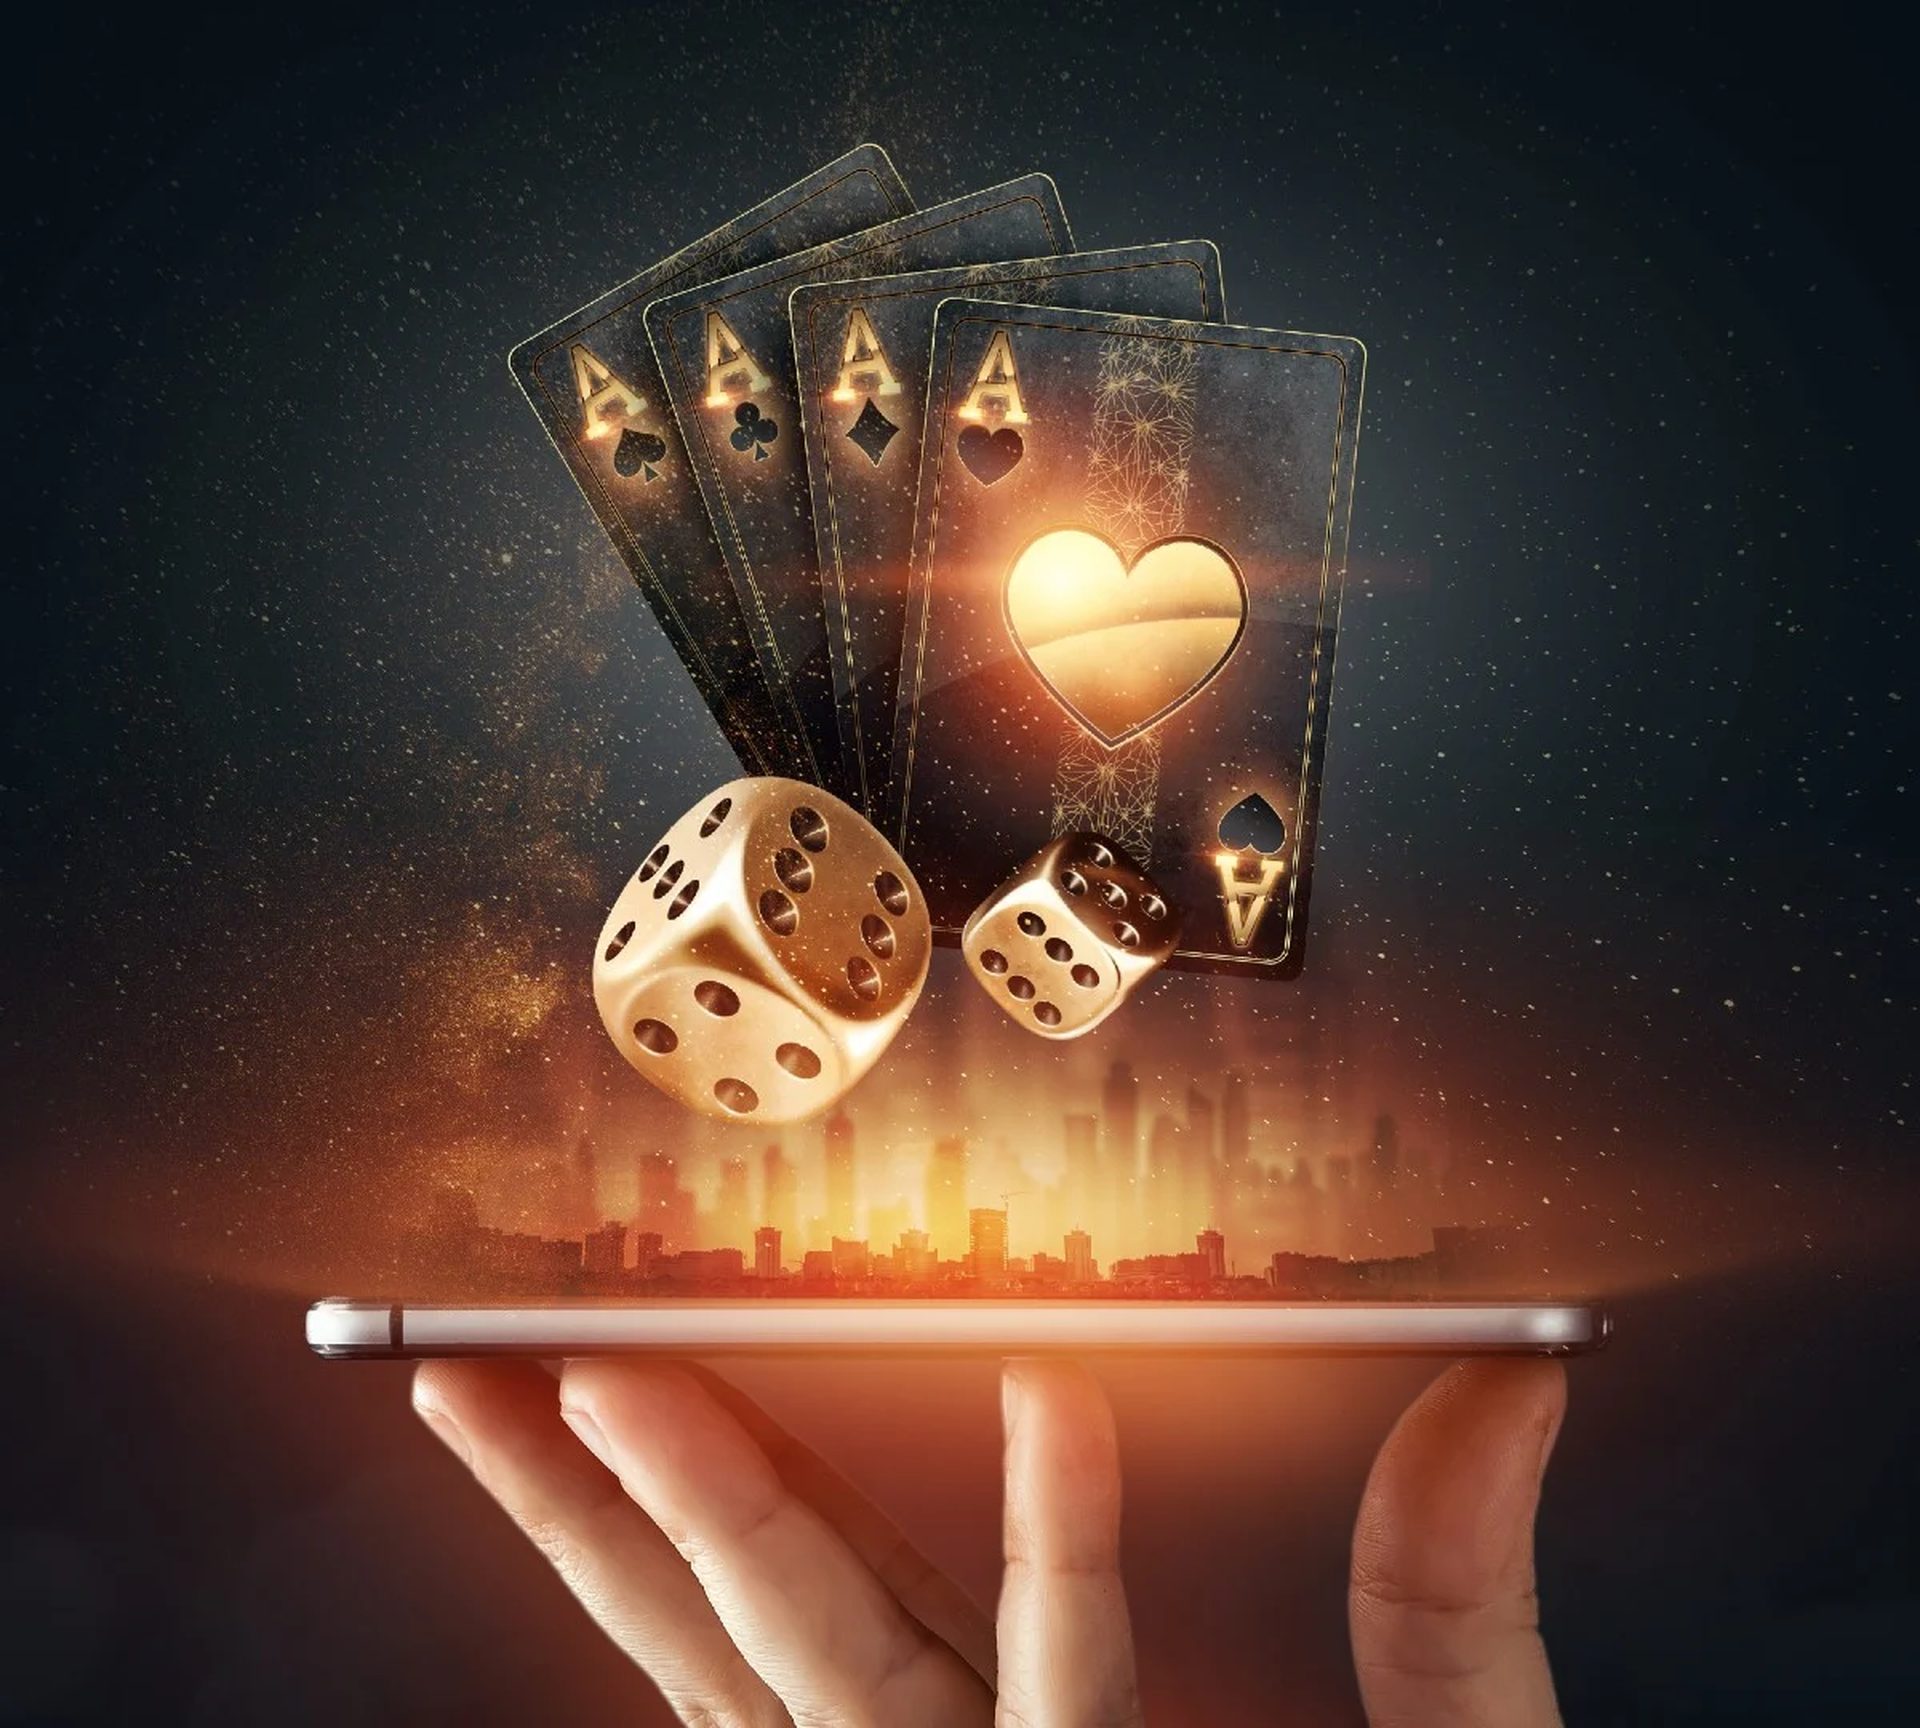 The technology behind online casino games